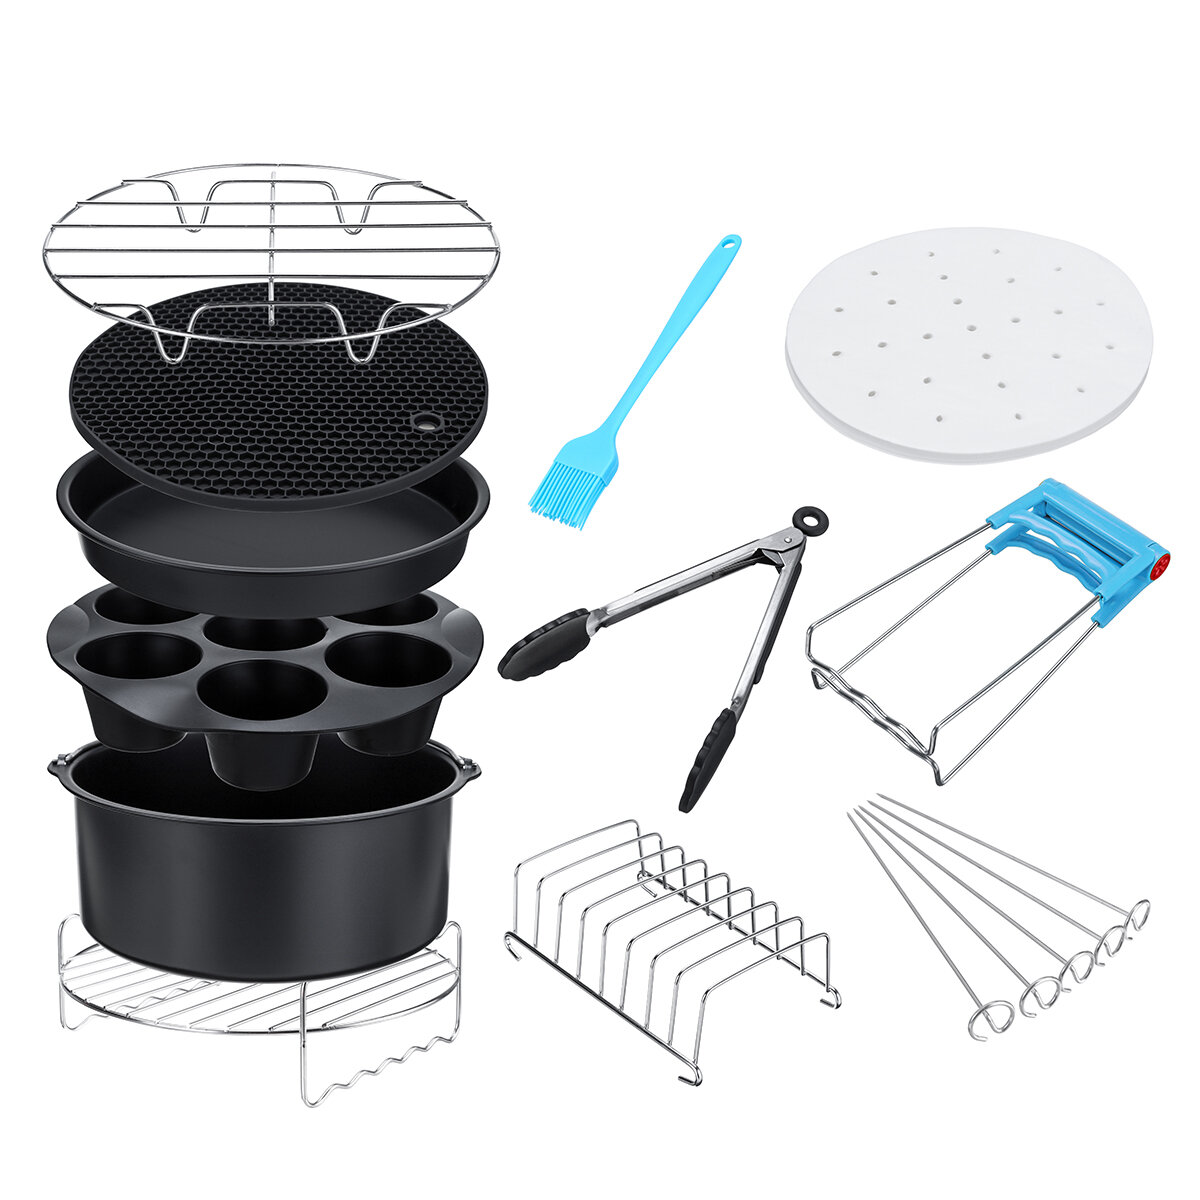 

9 Inches 115 Pcs Set Home Kitchen Healthy Barbecue Baking Air Fryer Accessories With Cake Barrel Pizza Pan Skewer Rack